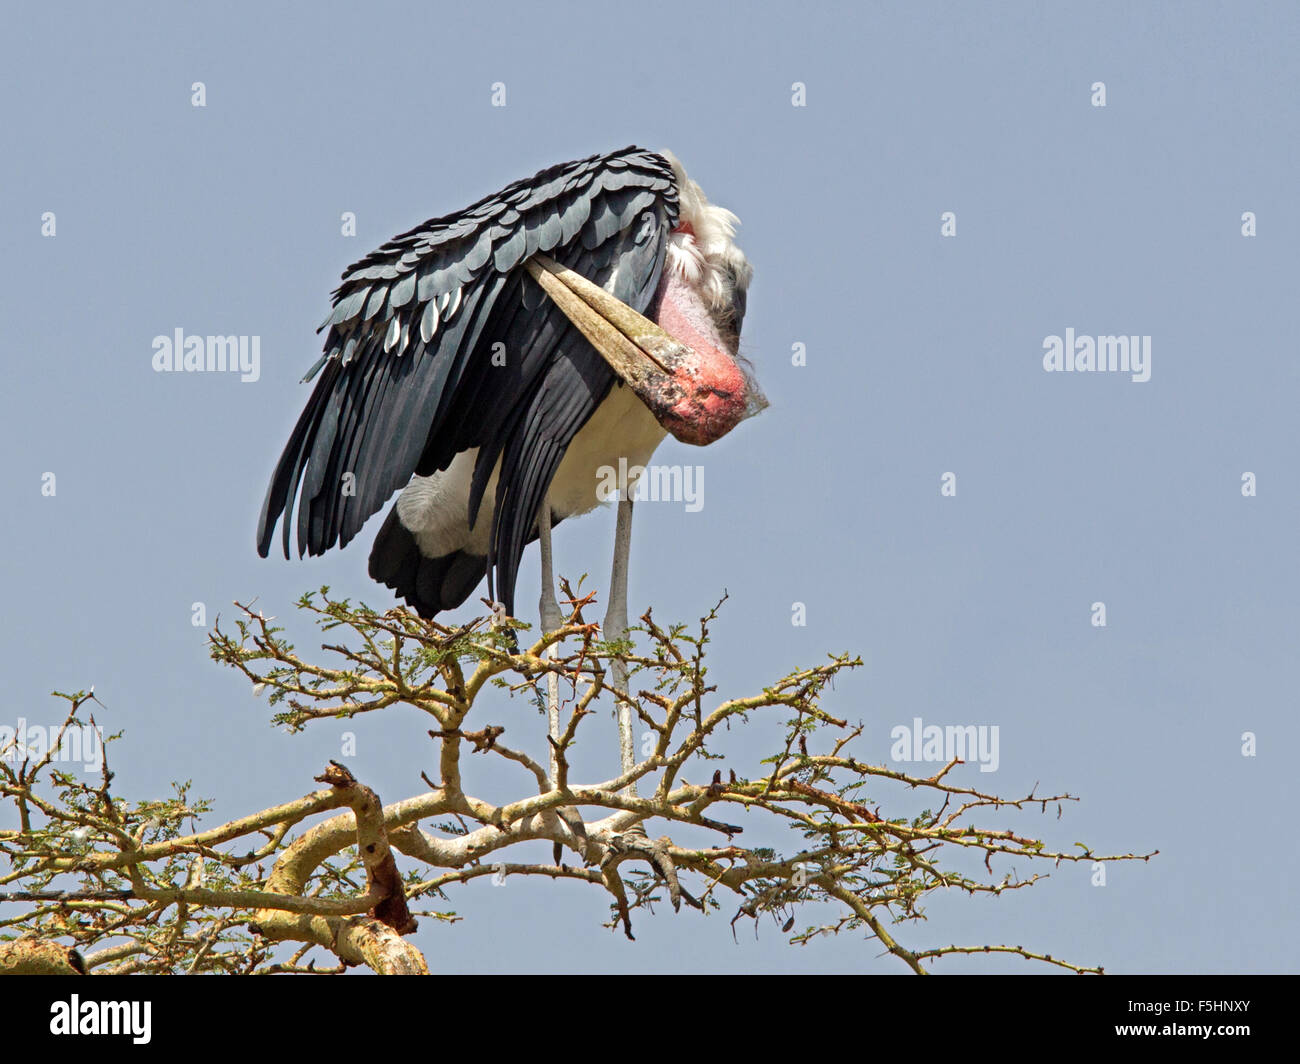 Marabou stork, preening, perched on tree top Stock Photo